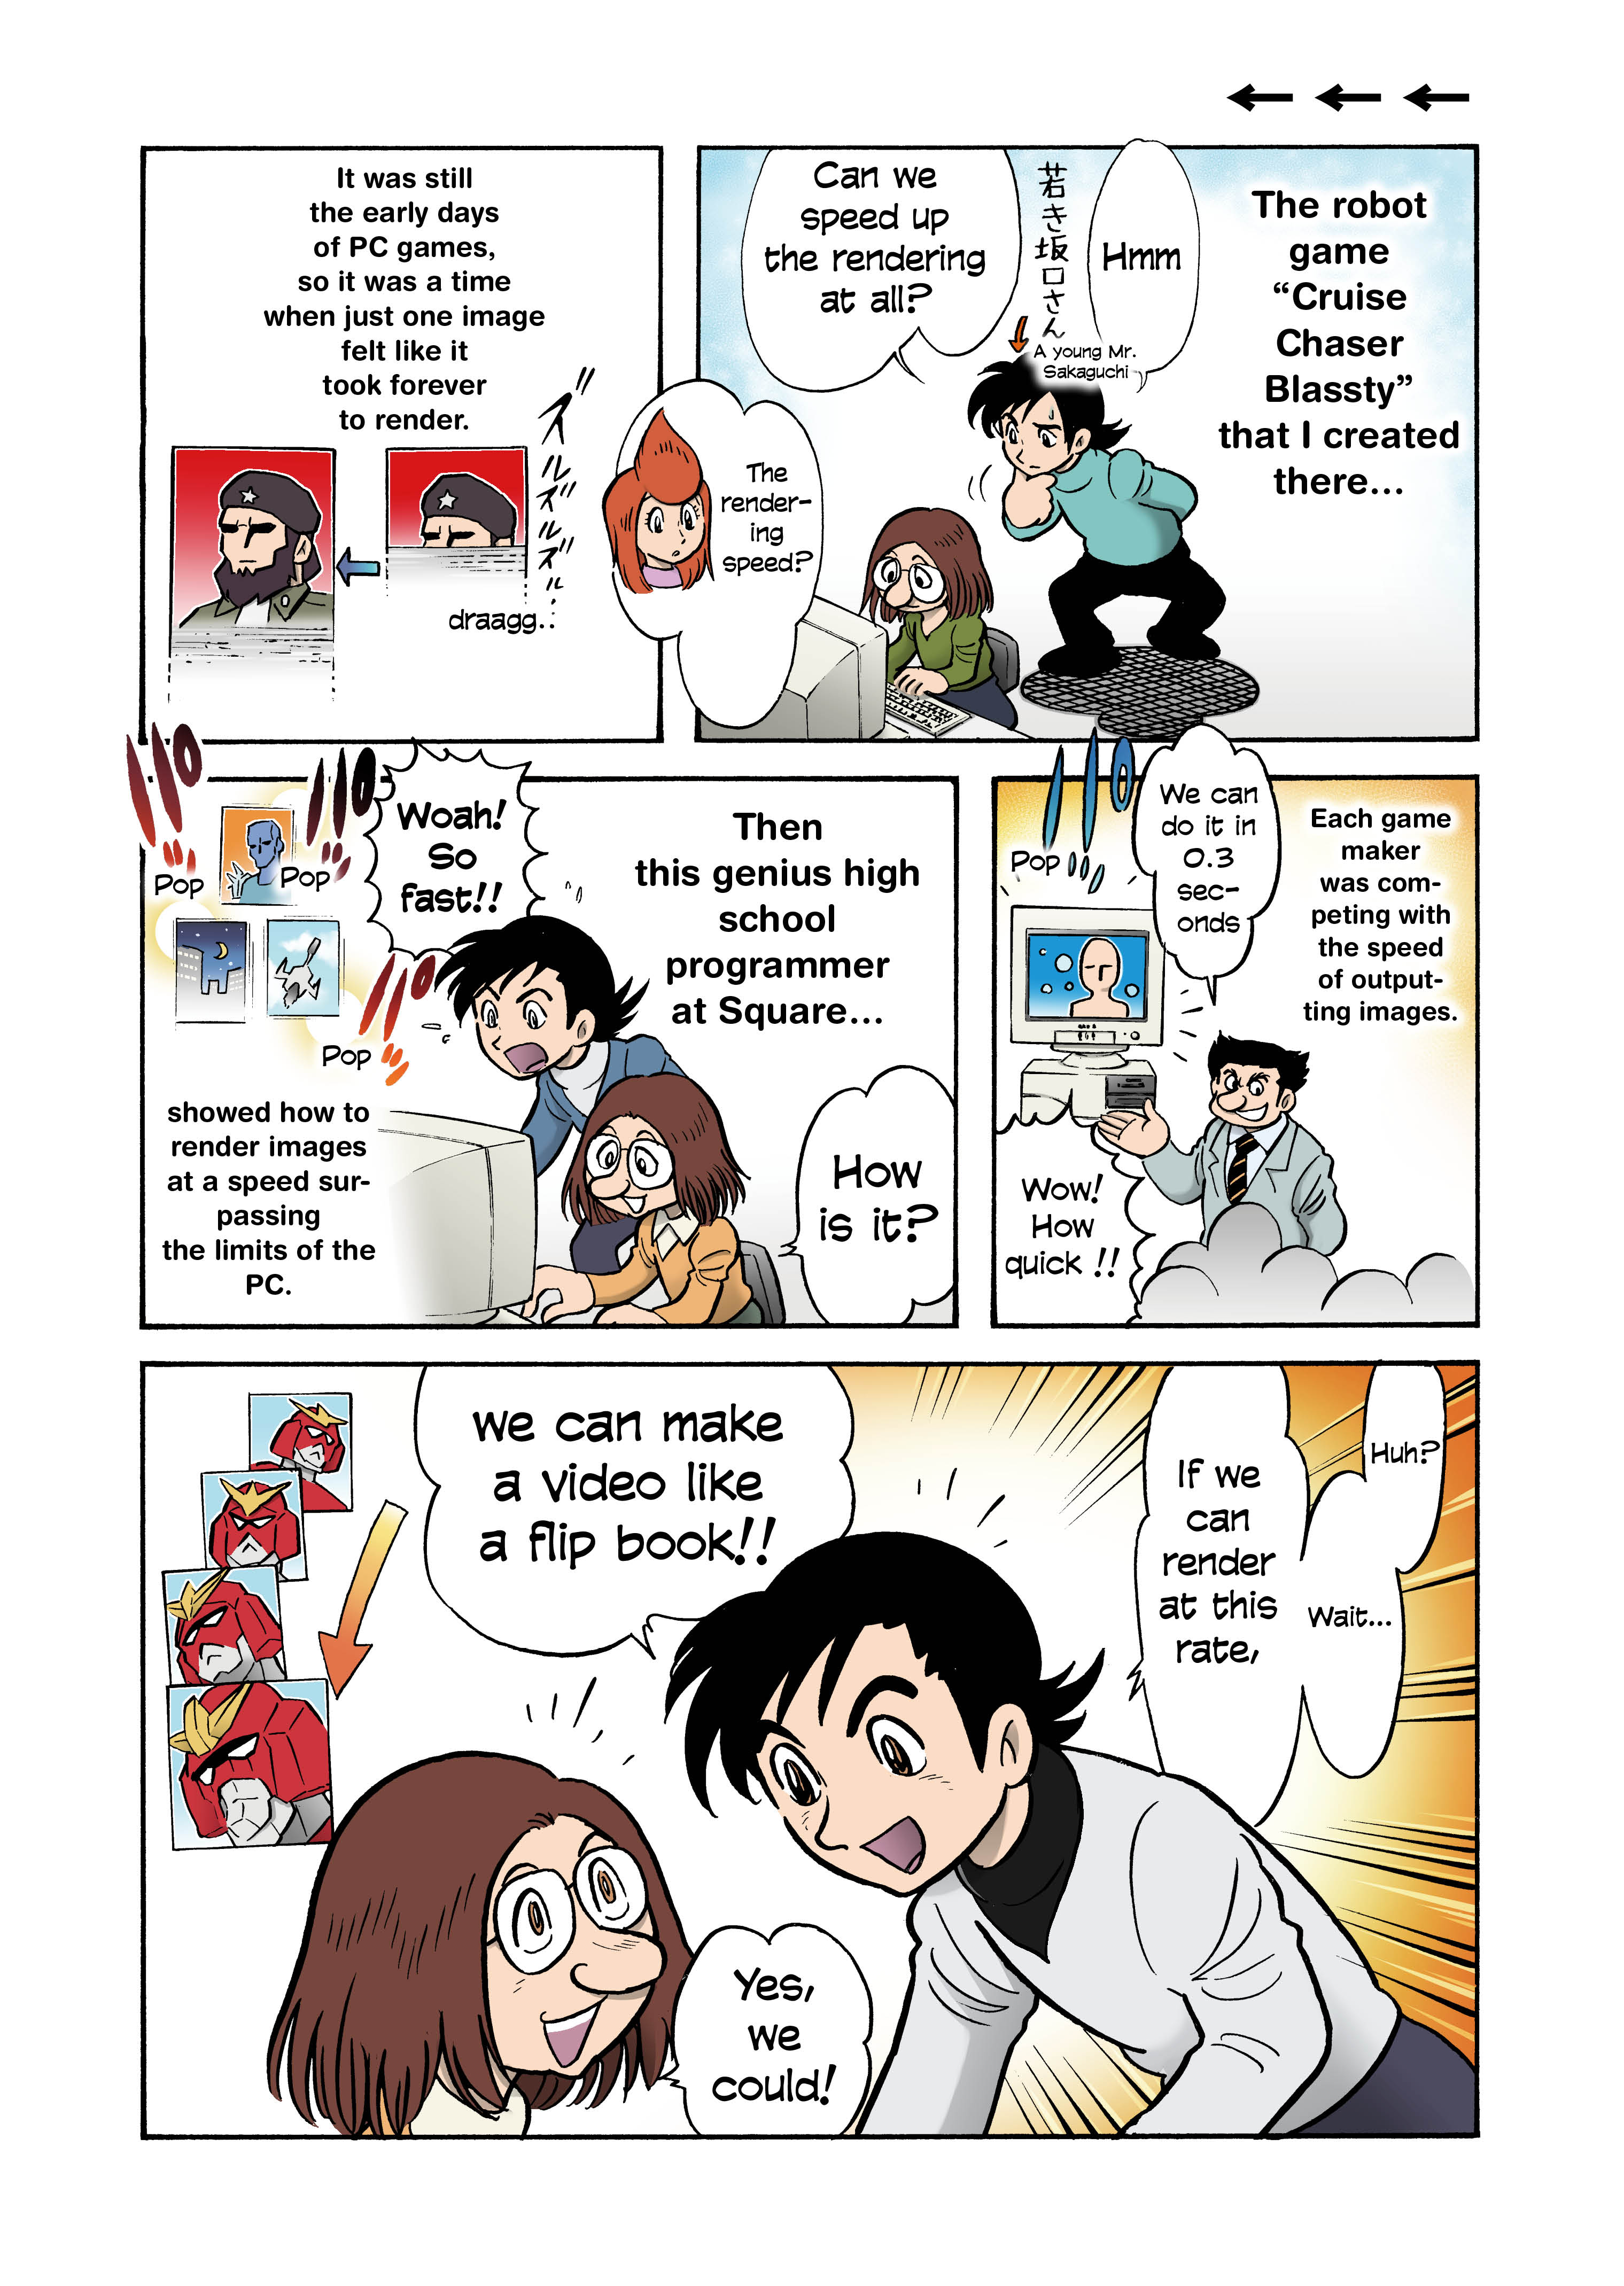 【New Comic Series】Hironobu Sakaguchi and FF programmers’ try to rival DQ [Game Designers in their ‘early’ days]_006